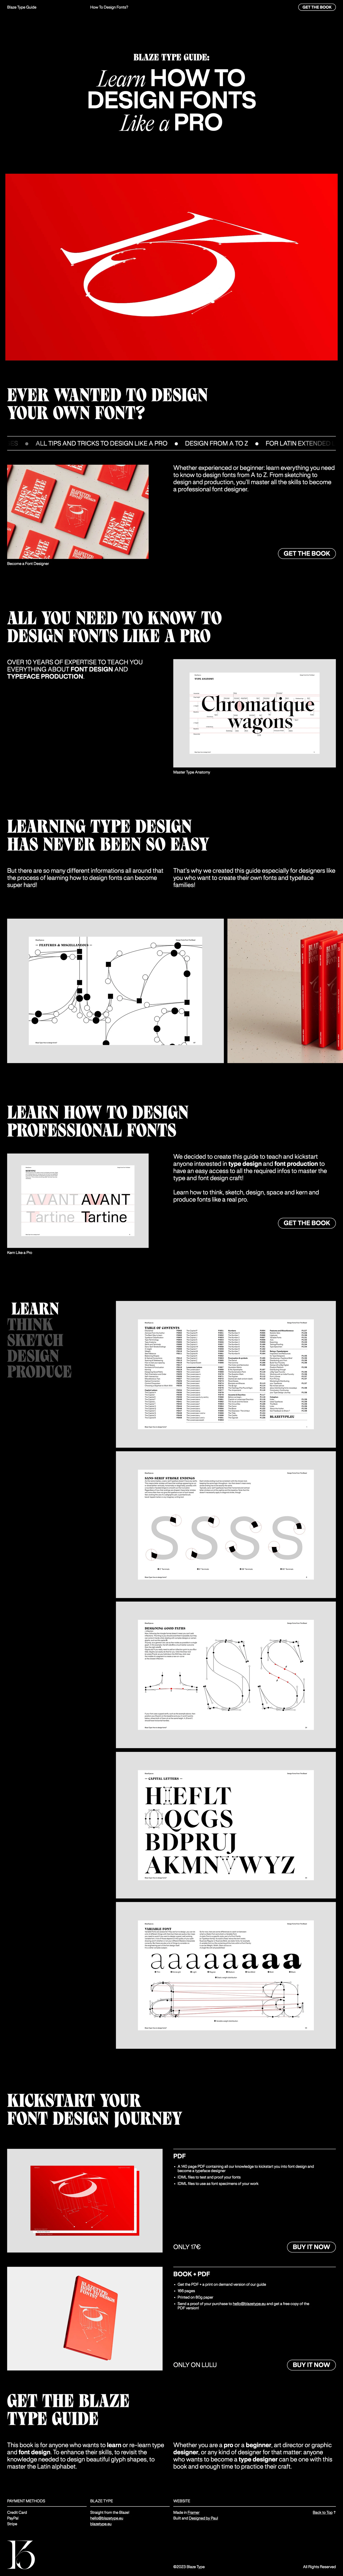 Blaze Type Landing Page Example: Unleash your inner font designer with How to design fonts? by Blaze Type. A guide to crafting exceptional typefaces. This book is your ultimate tool for mastering font design.